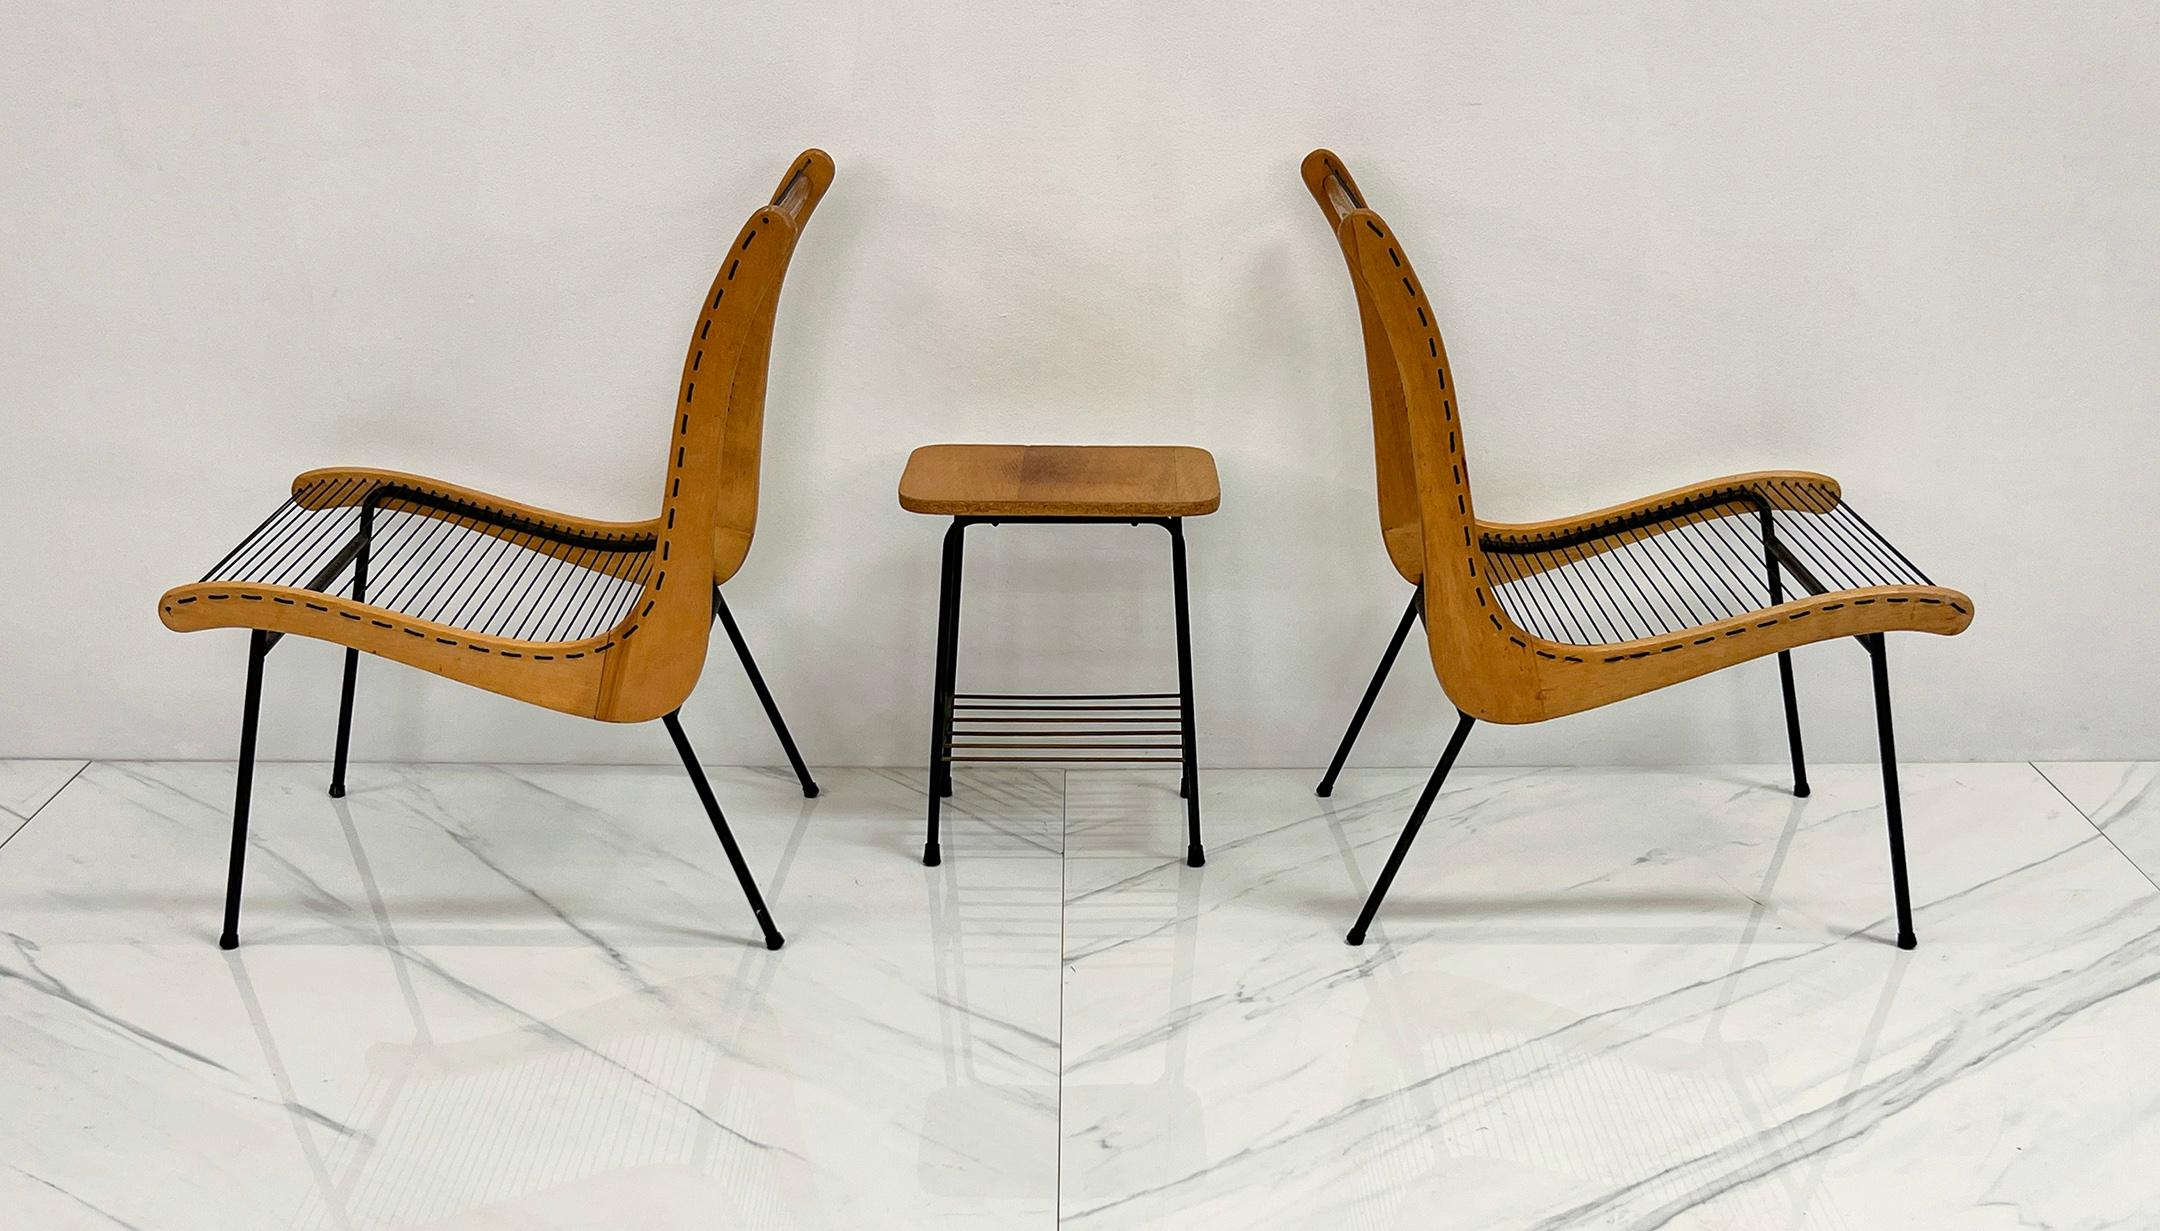 Maple String Chairs With Matching Table by Carl Koch, Vermont Tubbs, 1950's For Sale